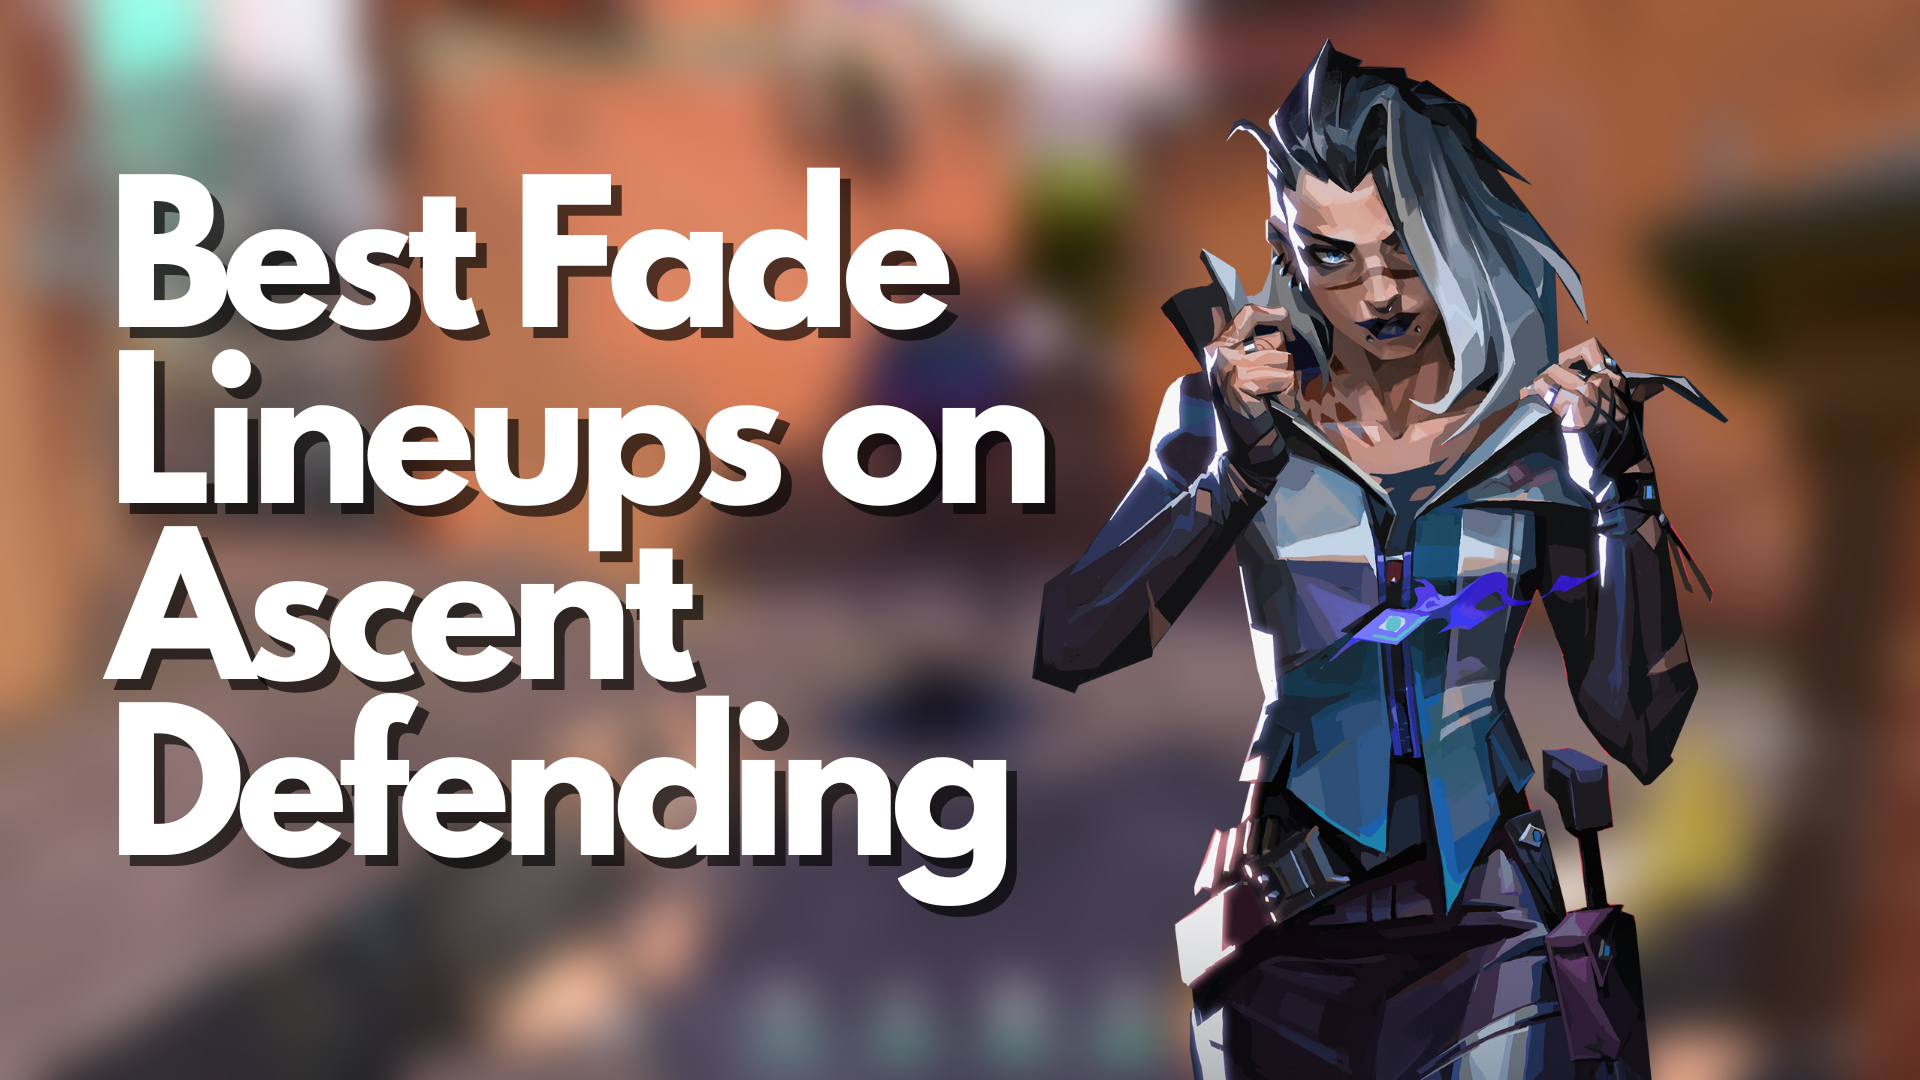 VALORANT: Best Fade Lineups on Ascent Defending